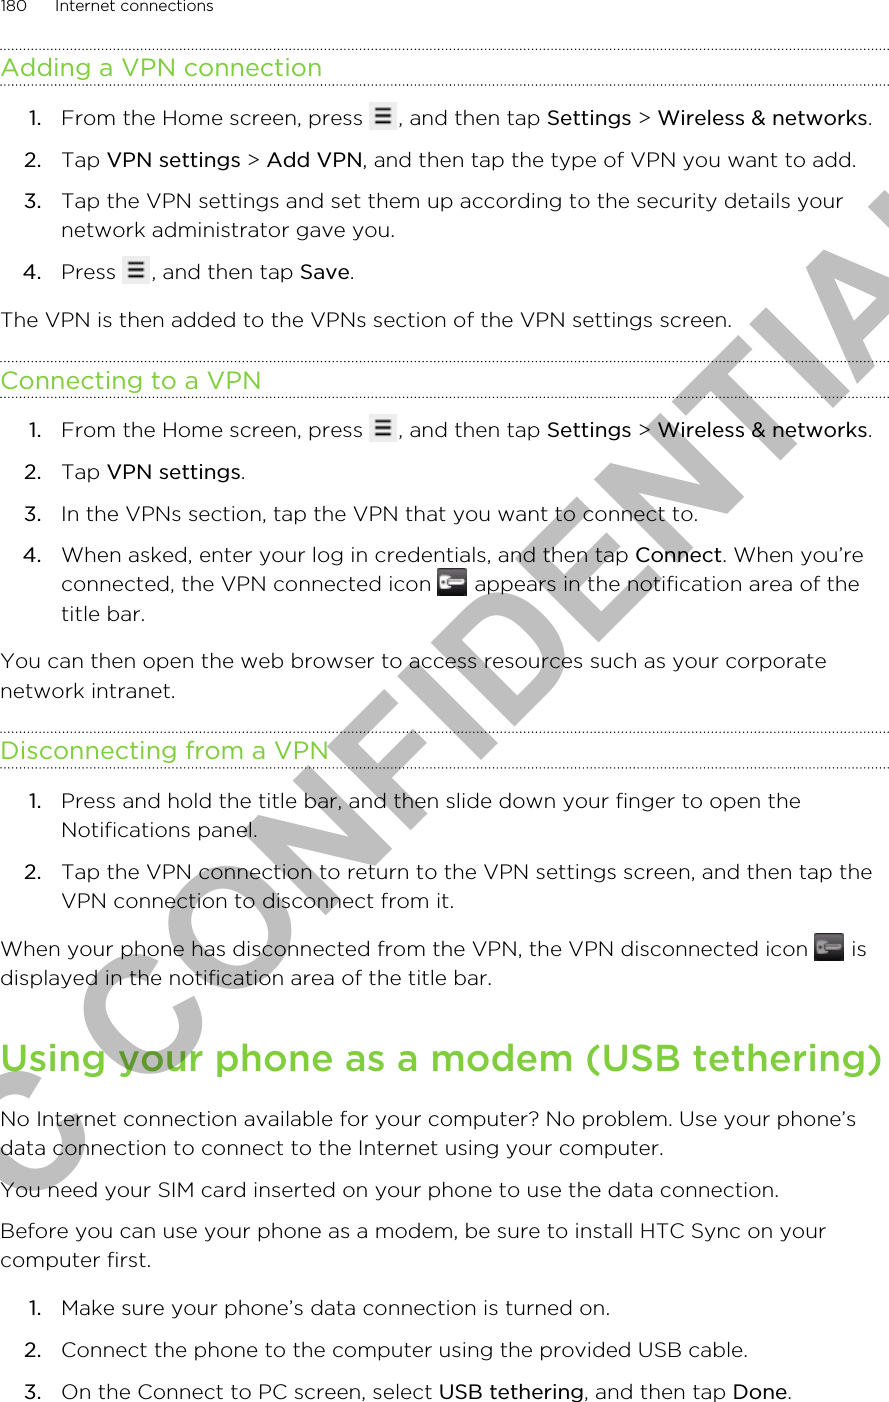 Adding a VPN connection1. From the Home screen, press  , and then tap Settings &gt; Wireless &amp; networks.2. Tap VPN settings &gt; Add VPN, and then tap the type of VPN you want to add.3. Tap the VPN settings and set them up according to the security details yournetwork administrator gave you.4. Press  , and then tap Save.The VPN is then added to the VPNs section of the VPN settings screen.Connecting to a VPN1. From the Home screen, press  , and then tap Settings &gt; Wireless &amp; networks.2. Tap VPN settings.3. In the VPNs section, tap the VPN that you want to connect to.4. When asked, enter your log in credentials, and then tap Connect. When you’reconnected, the VPN connected icon   appears in the notification area of thetitle bar.You can then open the web browser to access resources such as your corporatenetwork intranet.Disconnecting from a VPN1. Press and hold the title bar, and then slide down your finger to open theNotifications panel.2. Tap the VPN connection to return to the VPN settings screen, and then tap theVPN connection to disconnect from it.When your phone has disconnected from the VPN, the VPN disconnected icon   isdisplayed in the notification area of the title bar.Using your phone as a modem (USB tethering)No Internet connection available for your computer? No problem. Use your phone’sdata connection to connect to the Internet using your computer.You need your SIM card inserted on your phone to use the data connection.Before you can use your phone as a modem, be sure to install HTC Sync on yourcomputer first.1. Make sure your phone’s data connection is turned on.2. Connect the phone to the computer using the provided USB cable.3. On the Connect to PC screen, select USB tethering, and then tap Done.180 Internet connectionsHTC CONFIDENTIAL